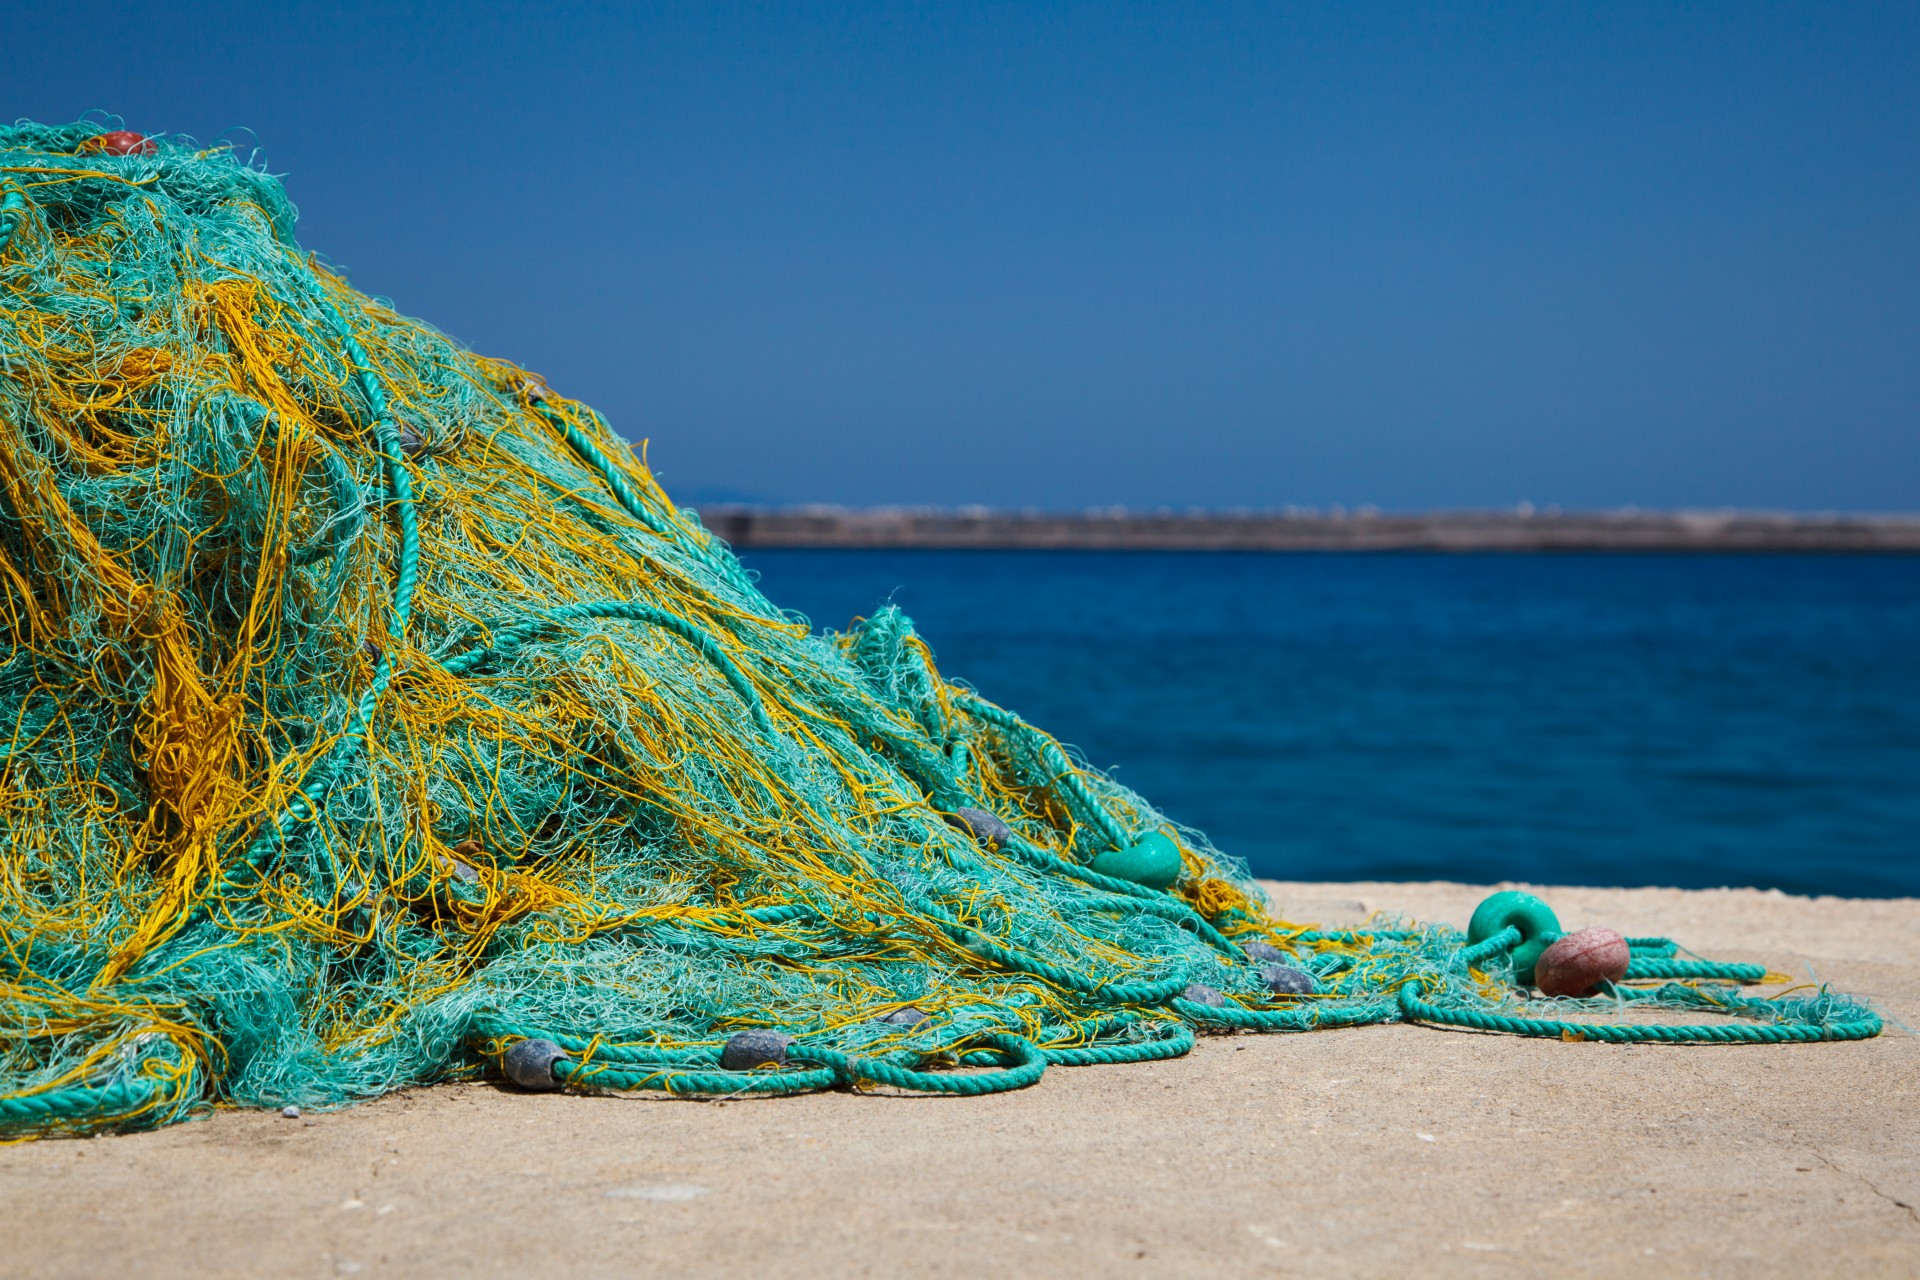 Recycled fishing nets on Nylon Stockings Day - MaterialDistrict